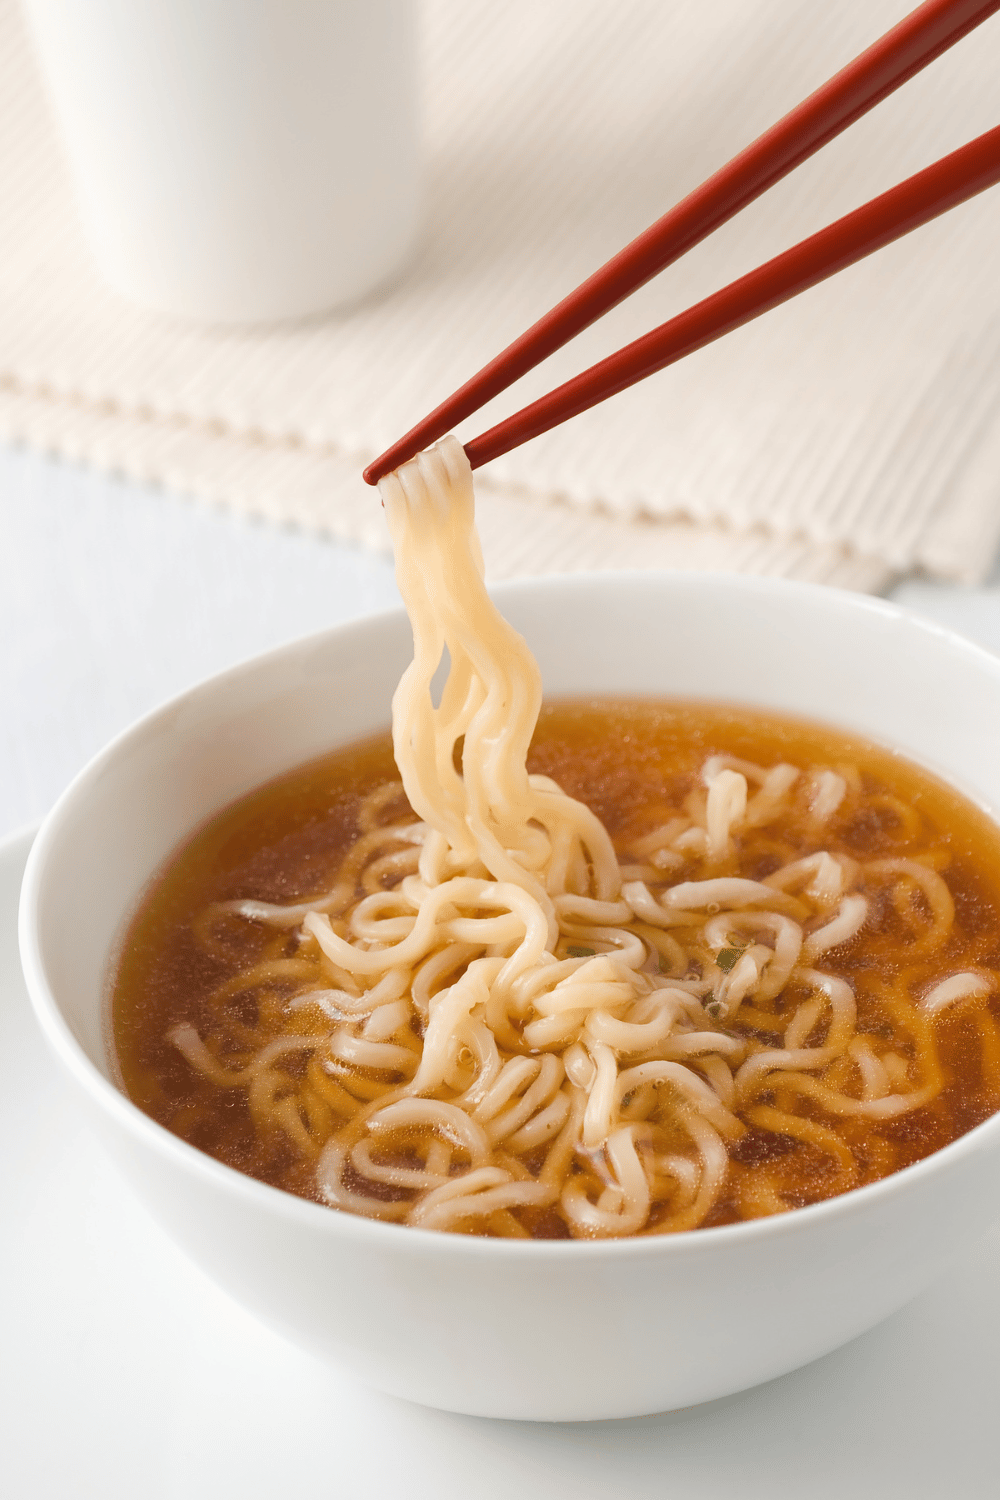 Are You a Ramen Lover? Here are 5 Ramen Broth Types You Must Try